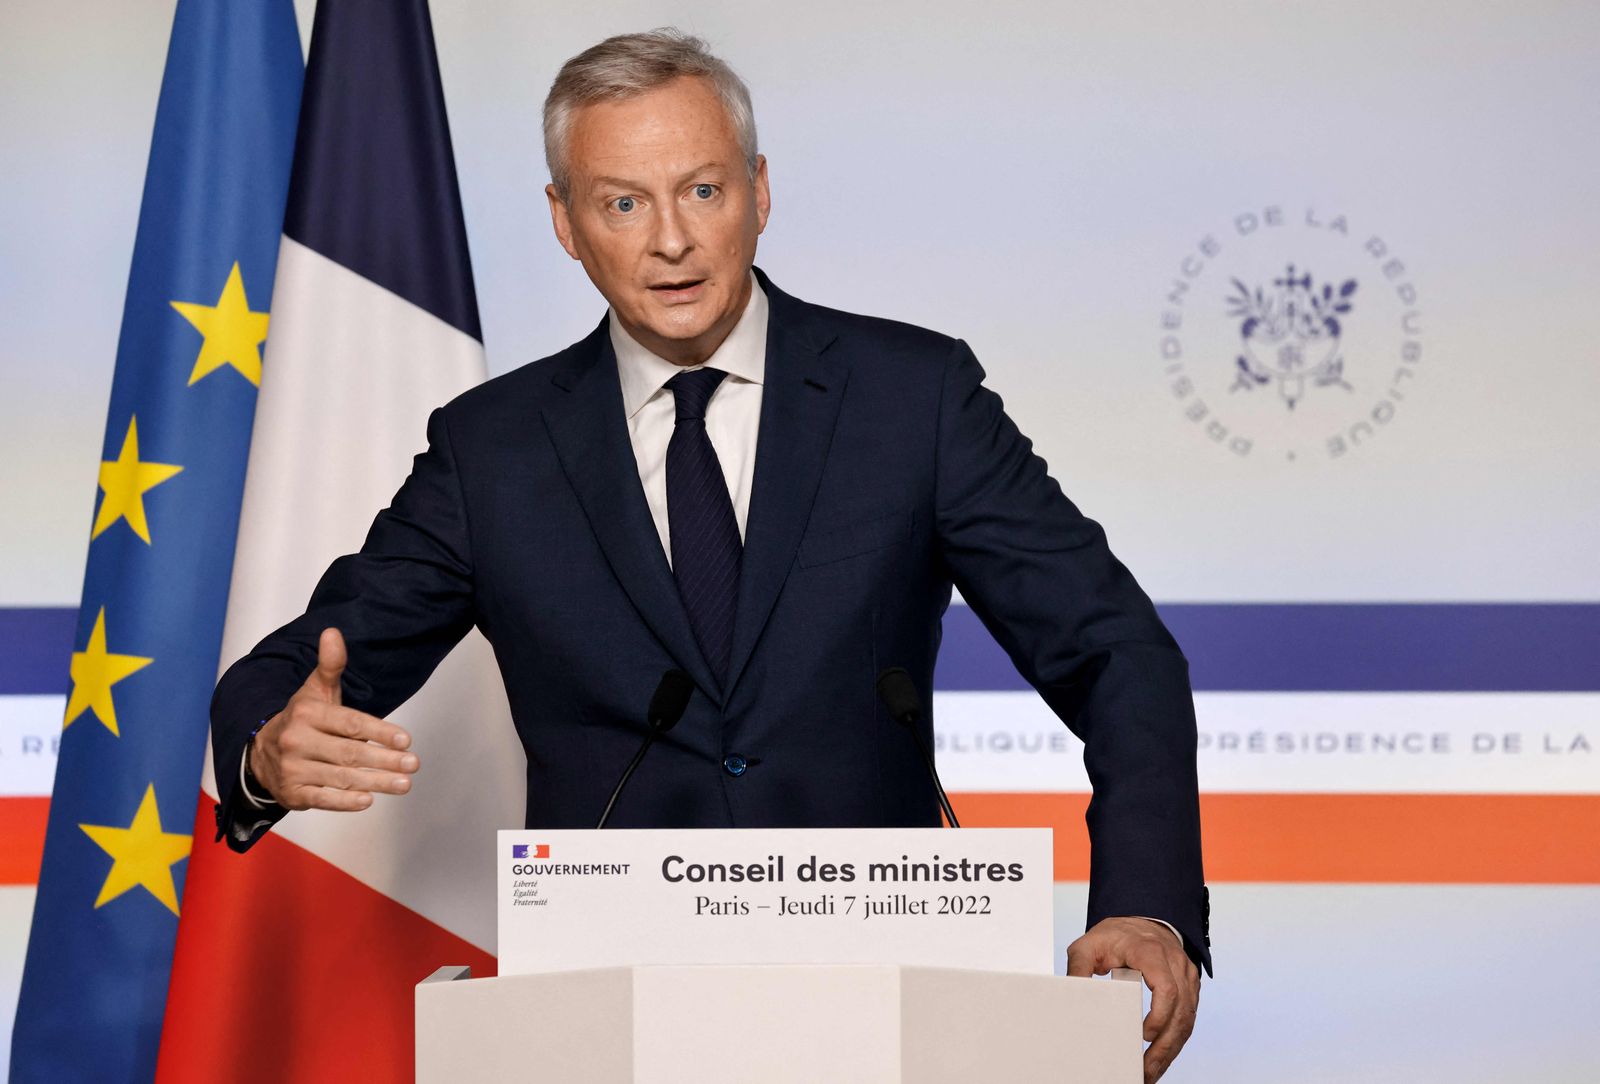 French Minister for the Economy and Finances Bruno Le Maire speaks during the press conference following the weekly cabinet meeting in Paris on July 7, 2022. (Photo by Ludovic MARIN / AFP) - AFP